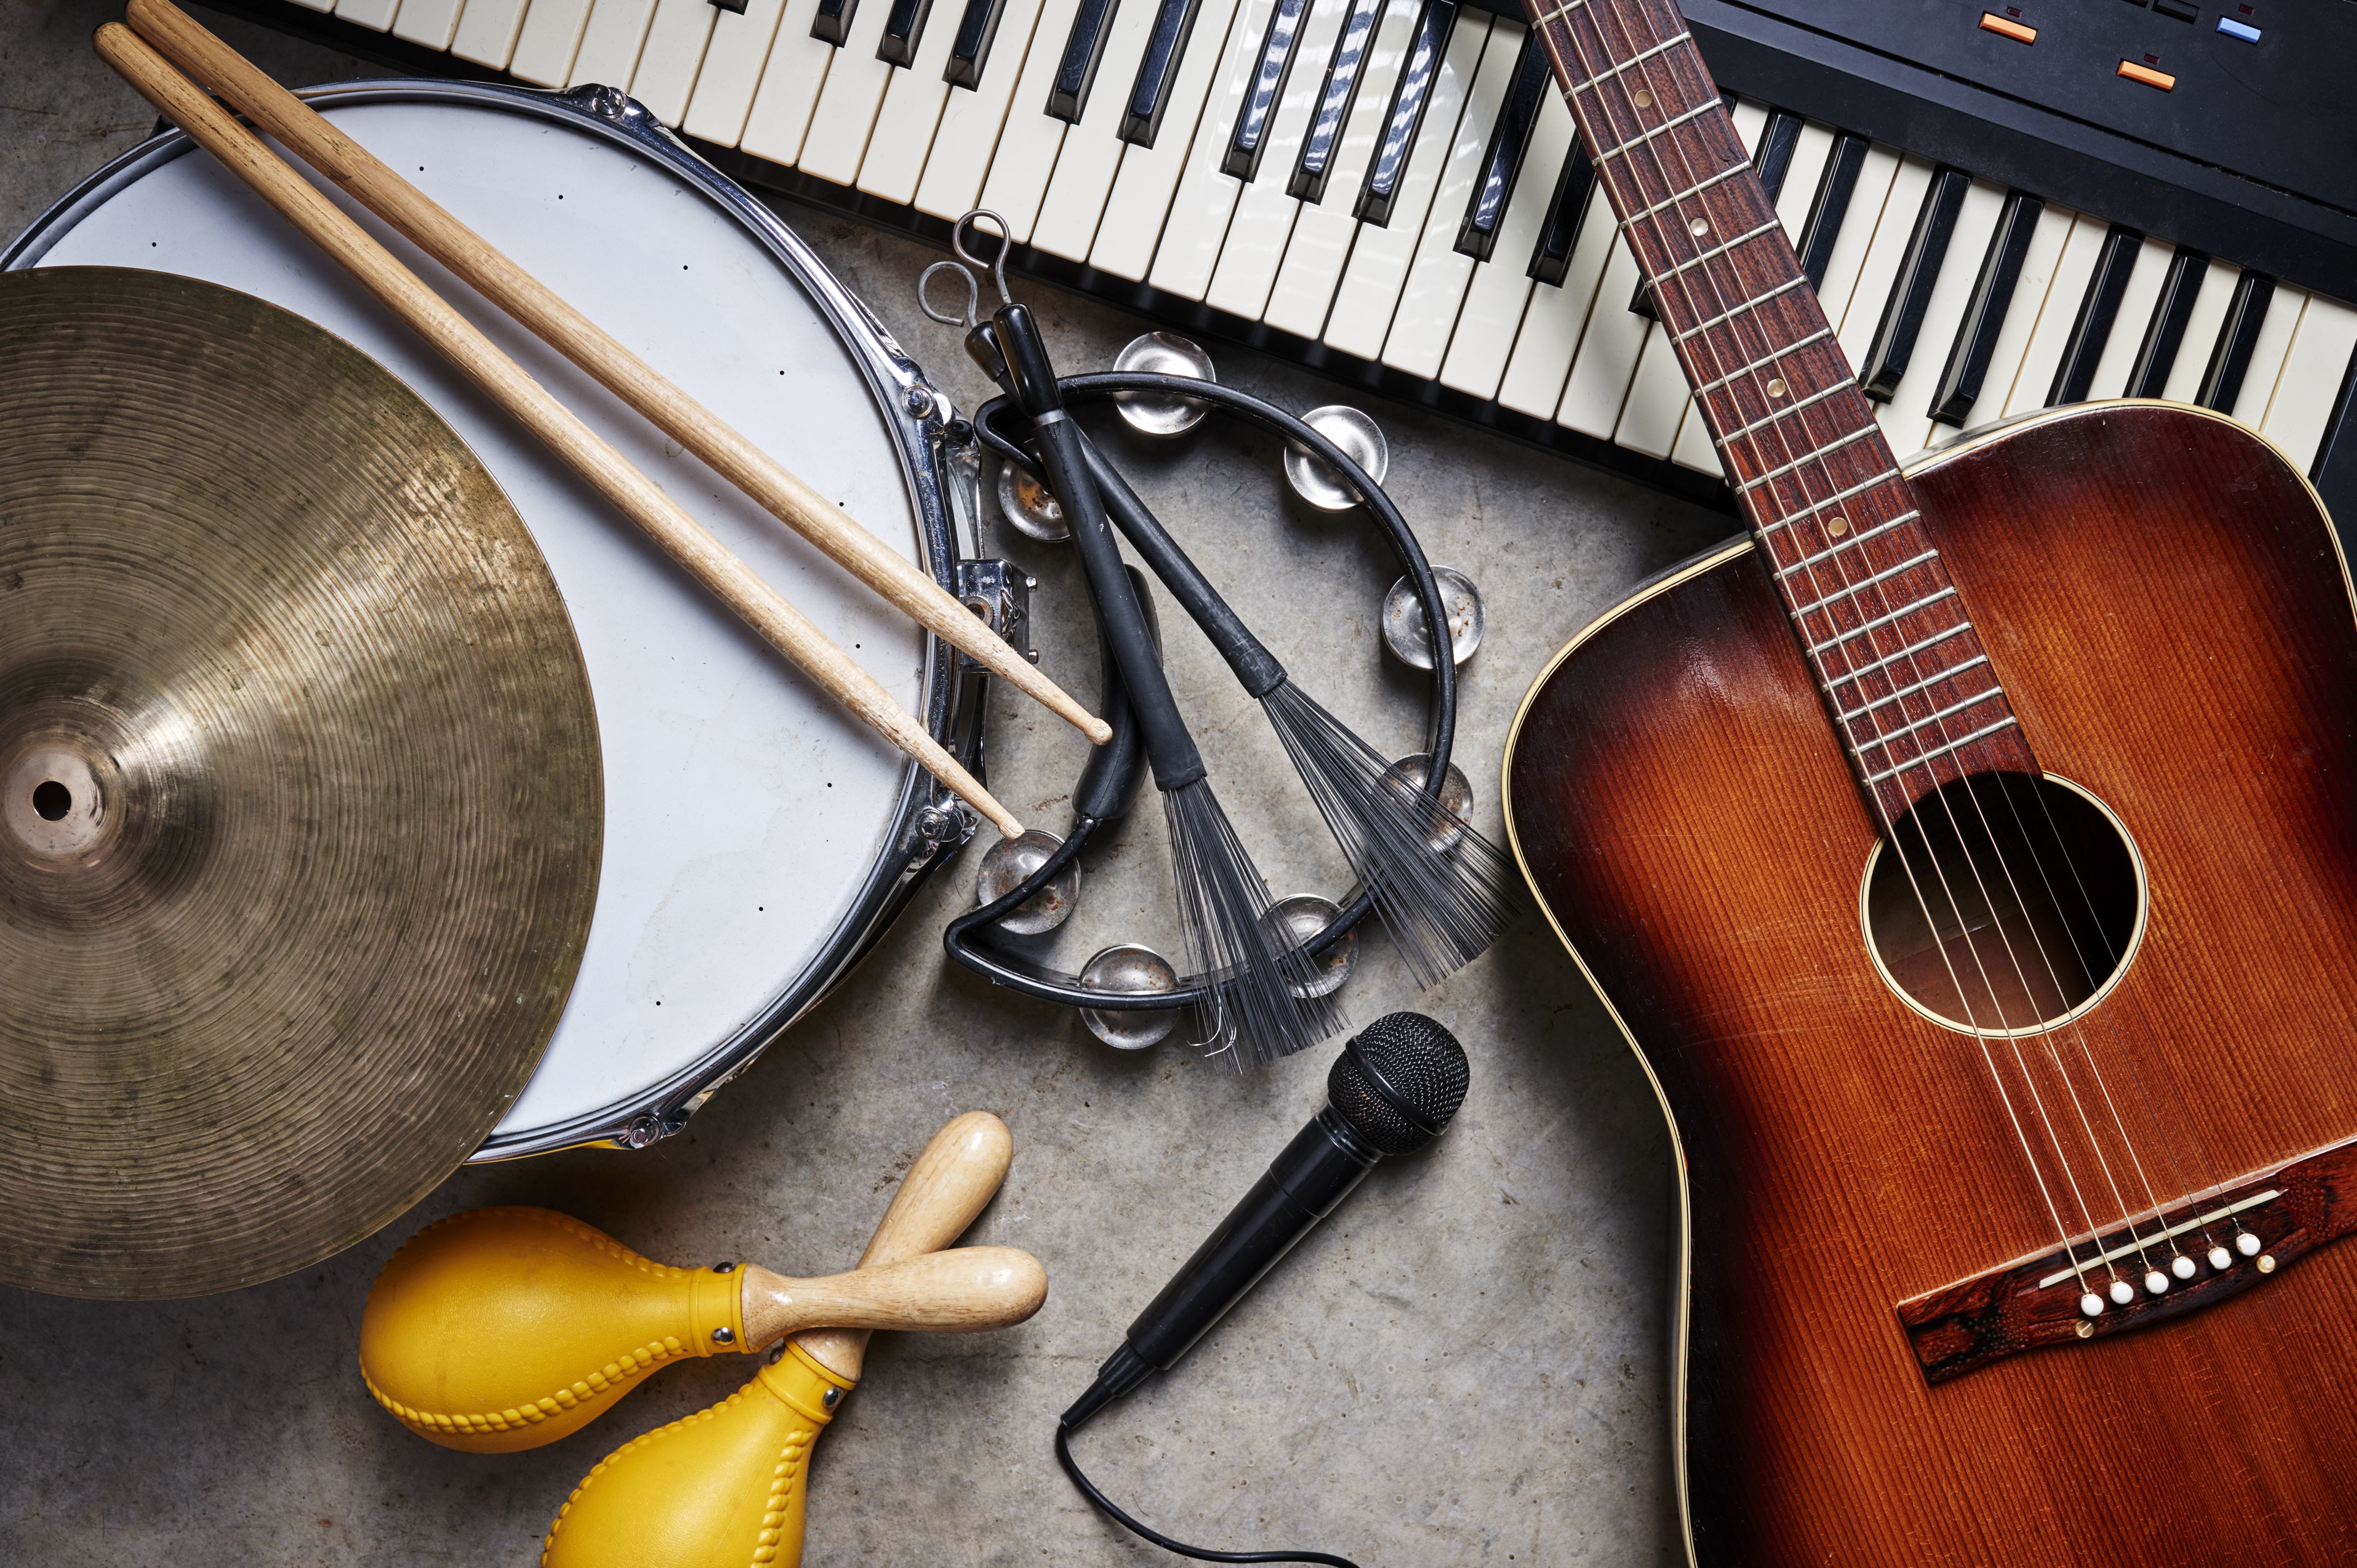 Guitar, keyboard , tambourine and other instruments